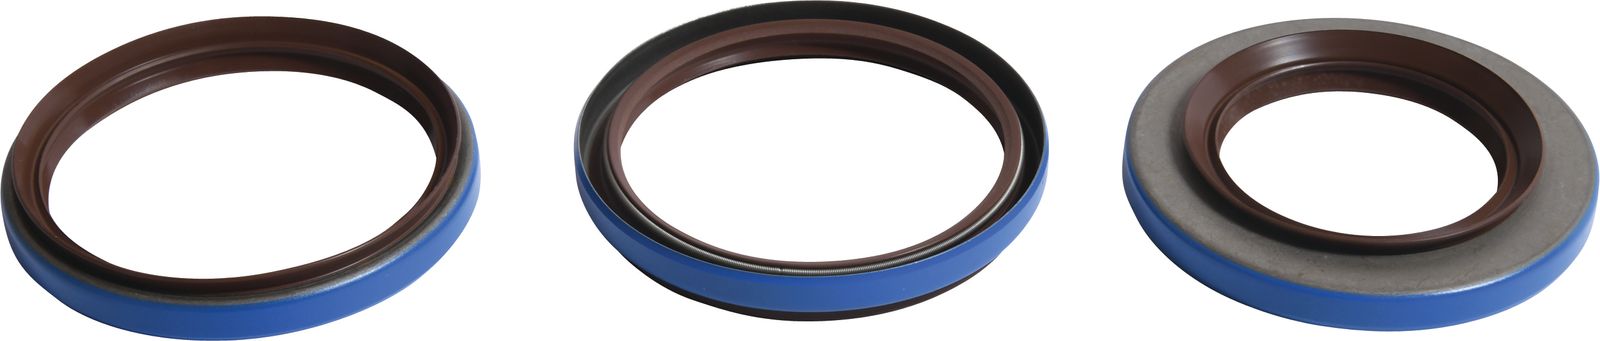 Wrp Diff Seal Kits - WRP252098-5 image